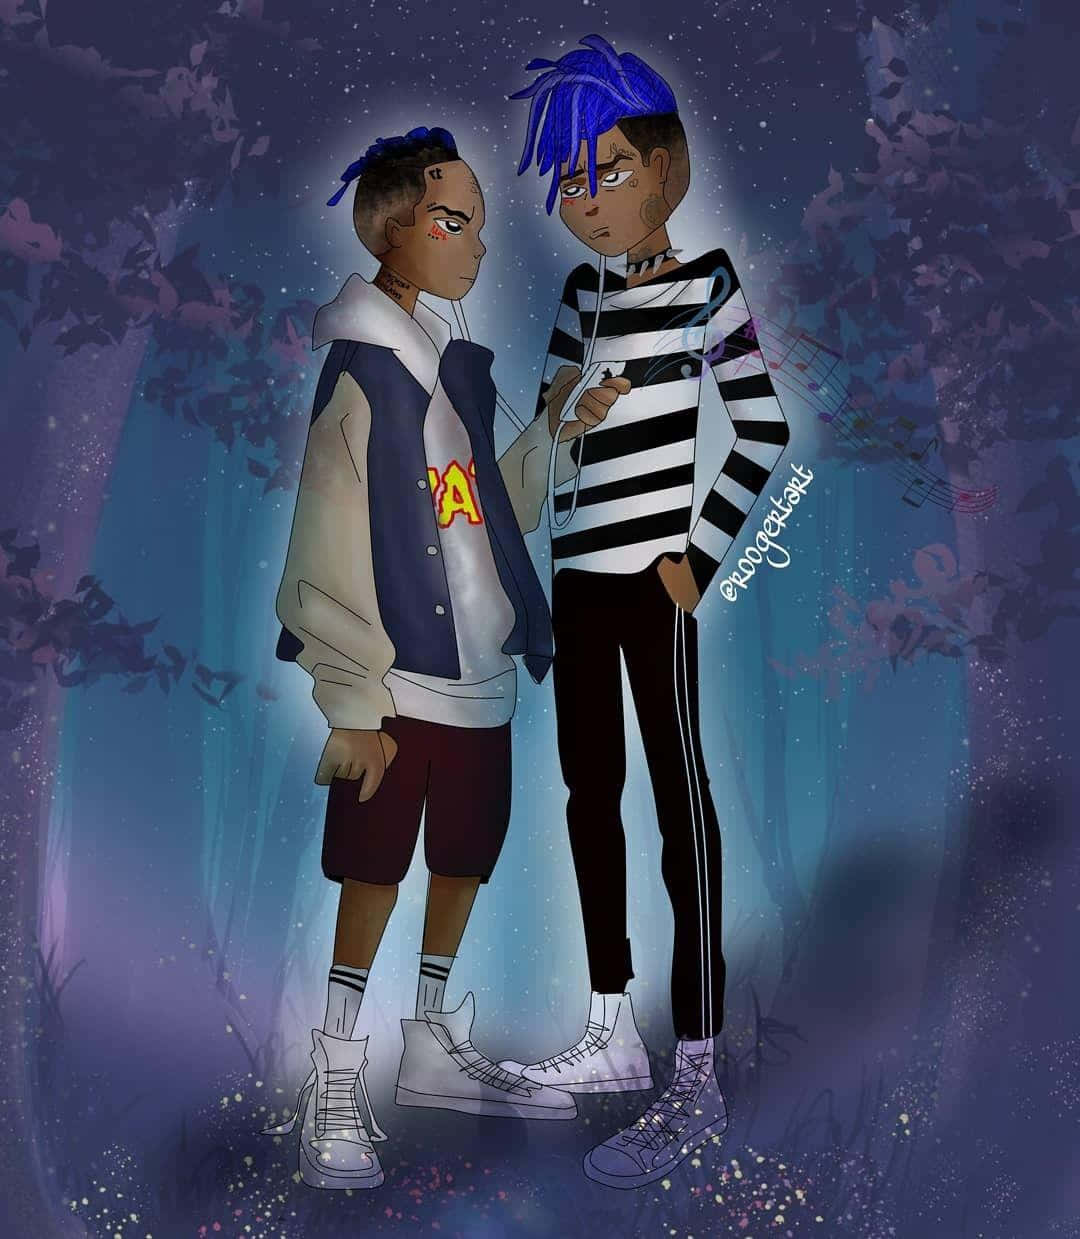 XXXTENTACION and Juice Wrld bring the heat in their hit collaboration. Wallpaper